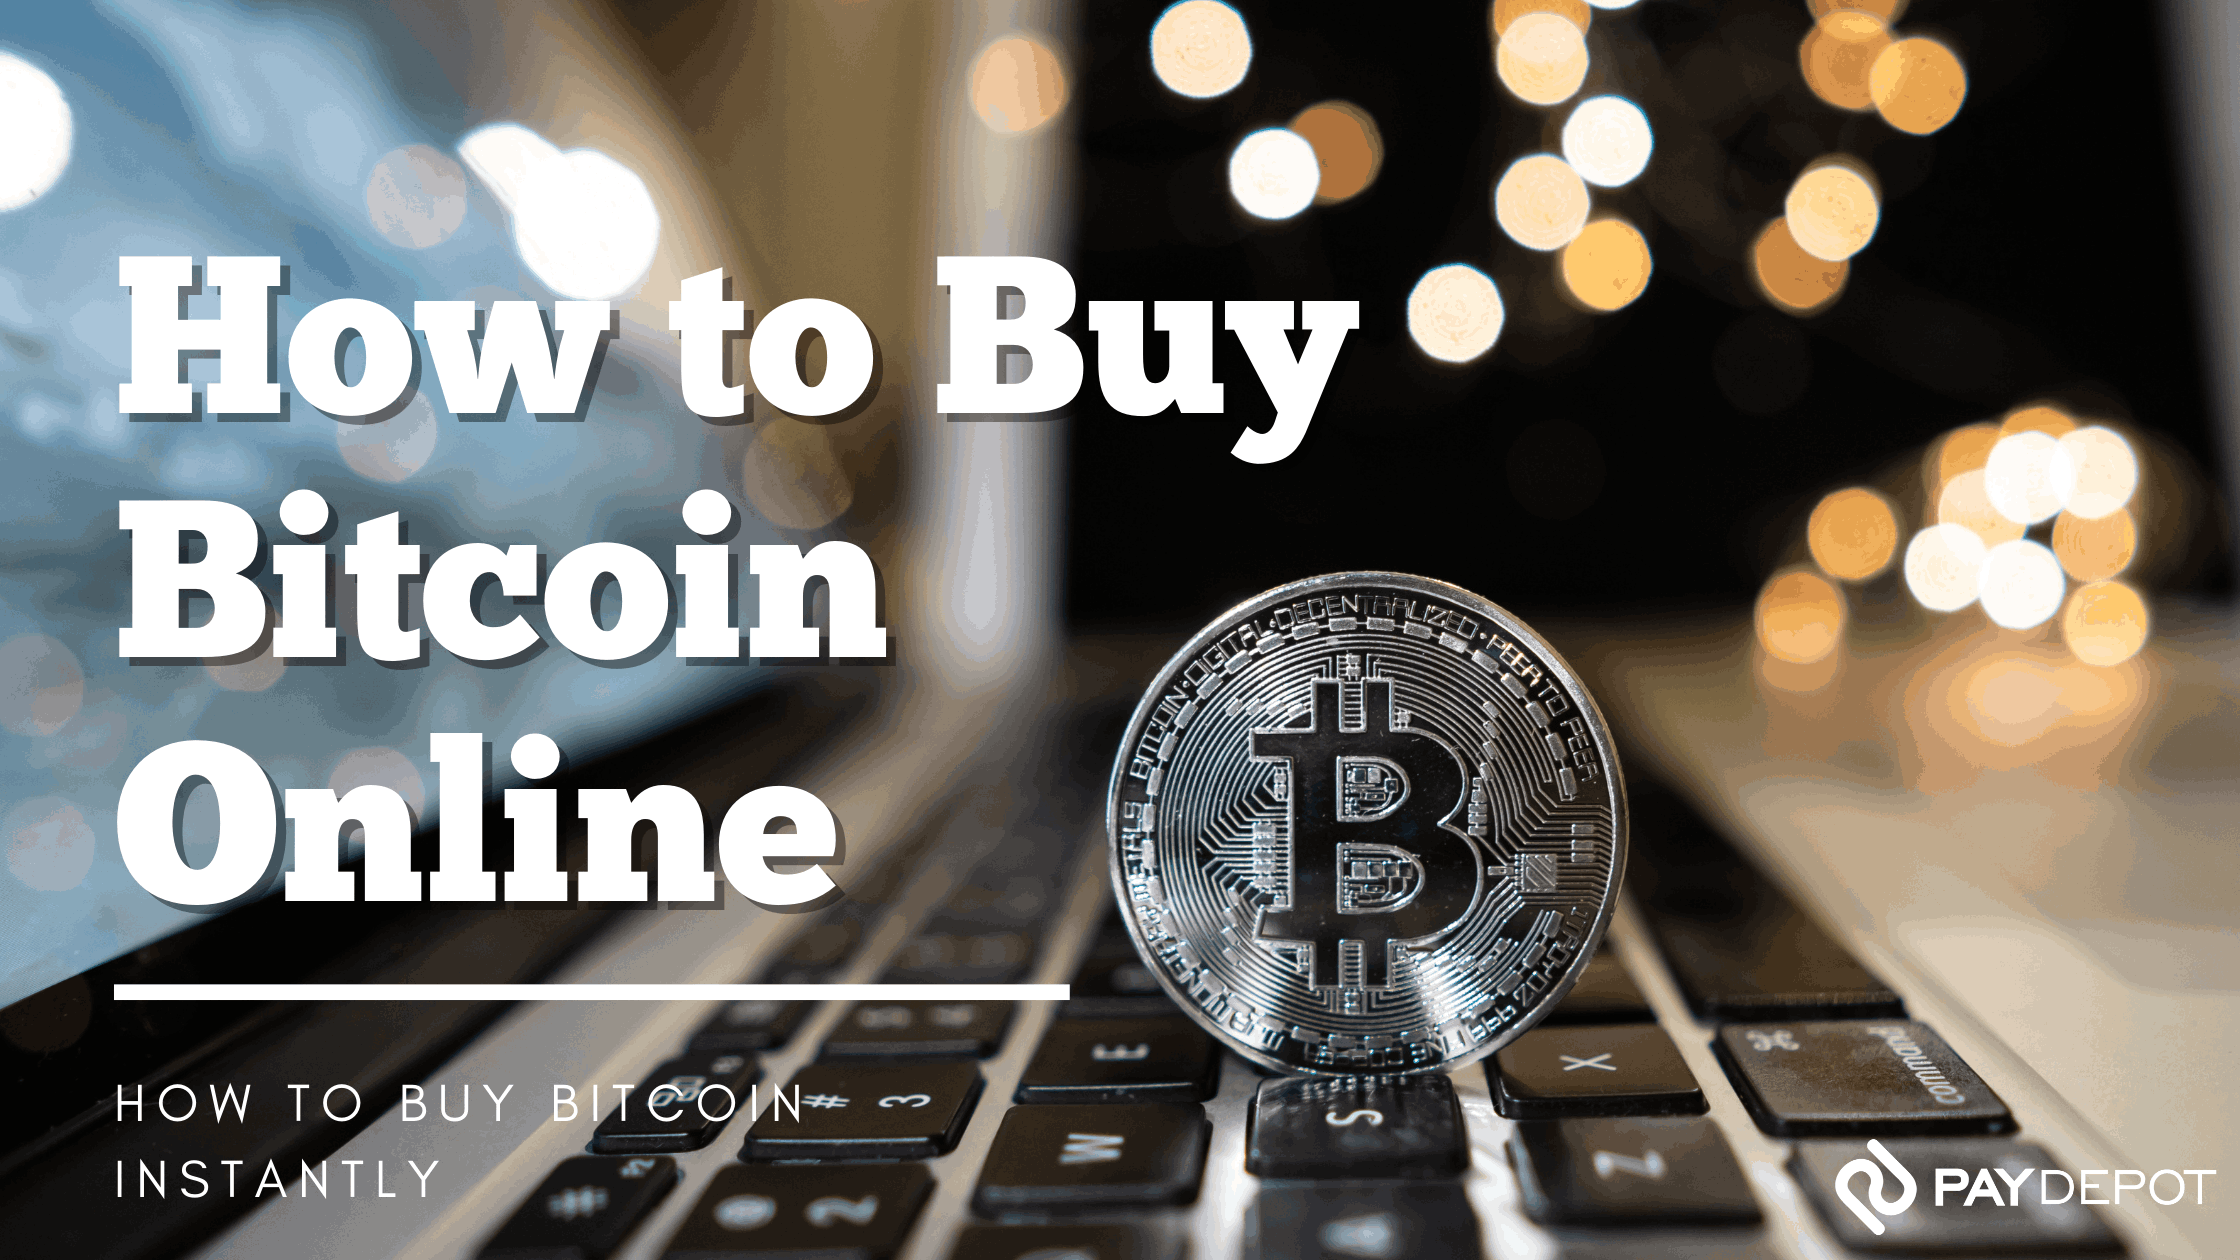 how to buy bitcoin site youtube.com